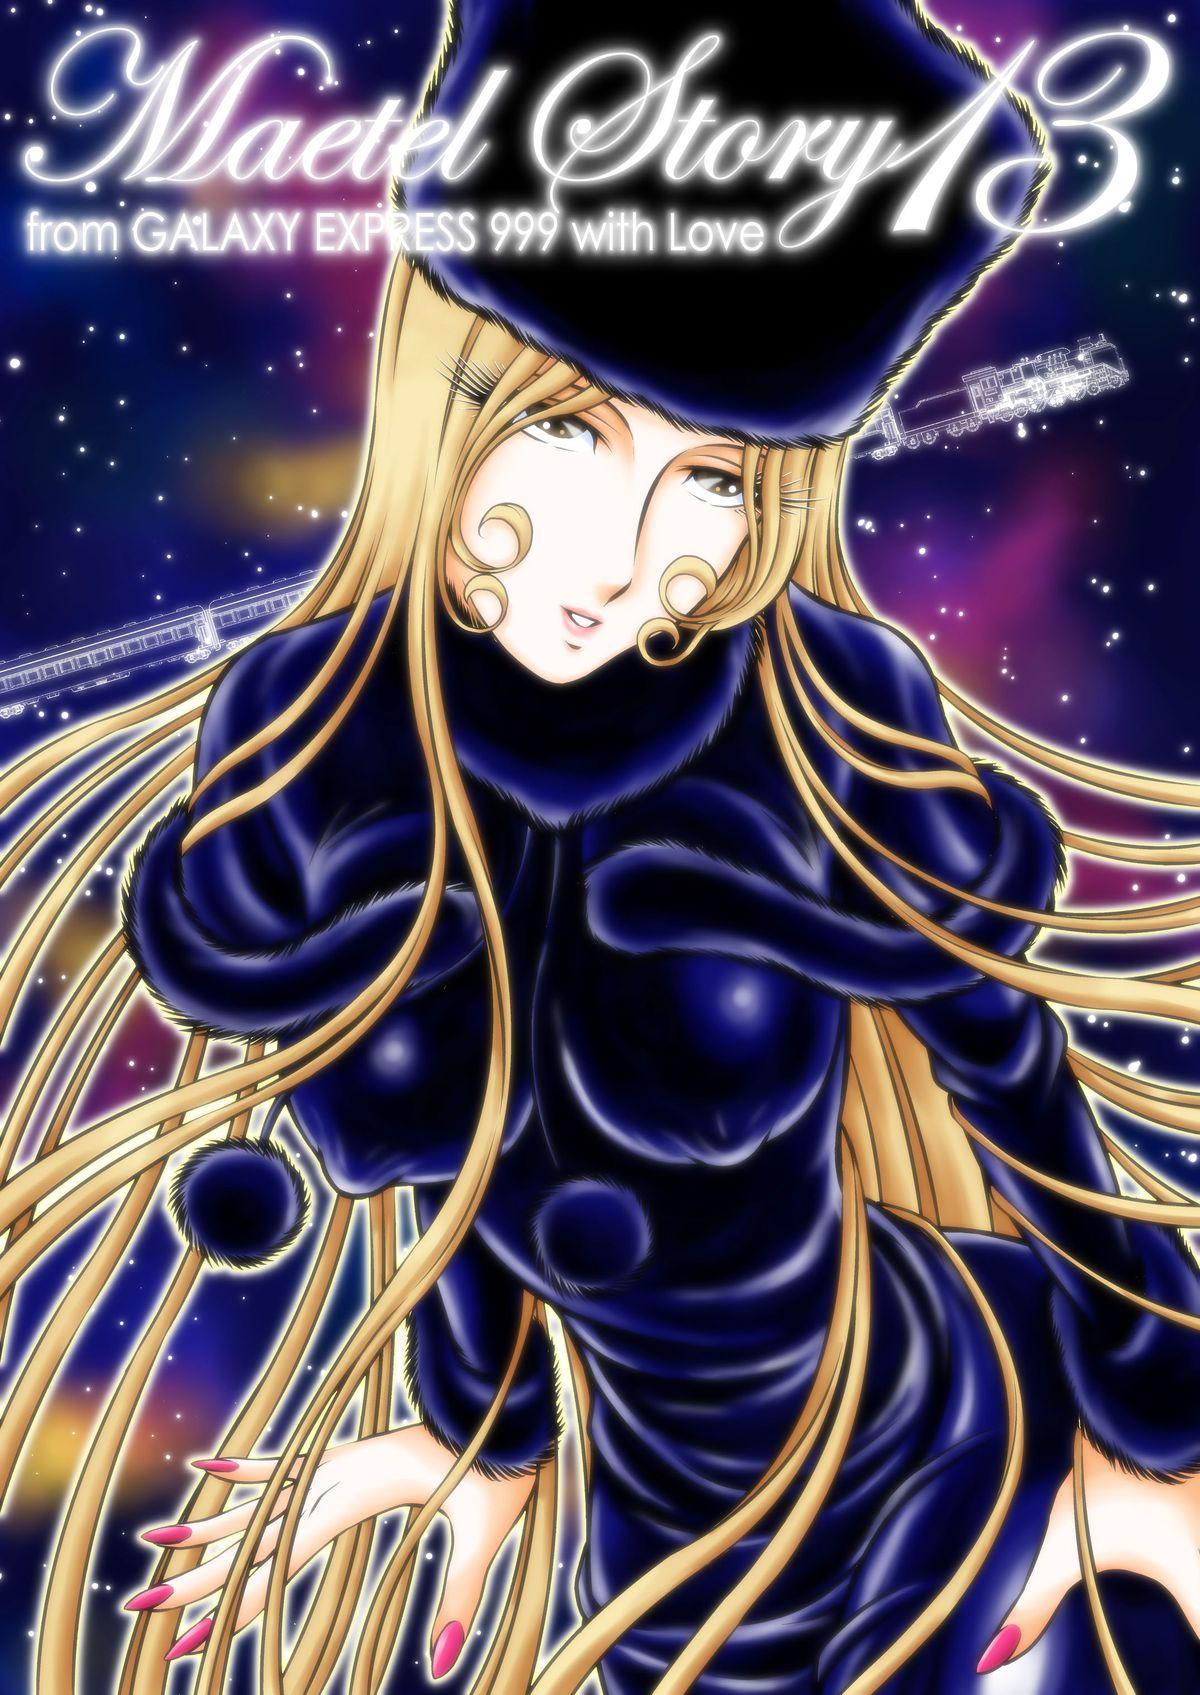 Orgasms Maetel Story 13 - Galaxy express 999 Round Ass - Picture 1